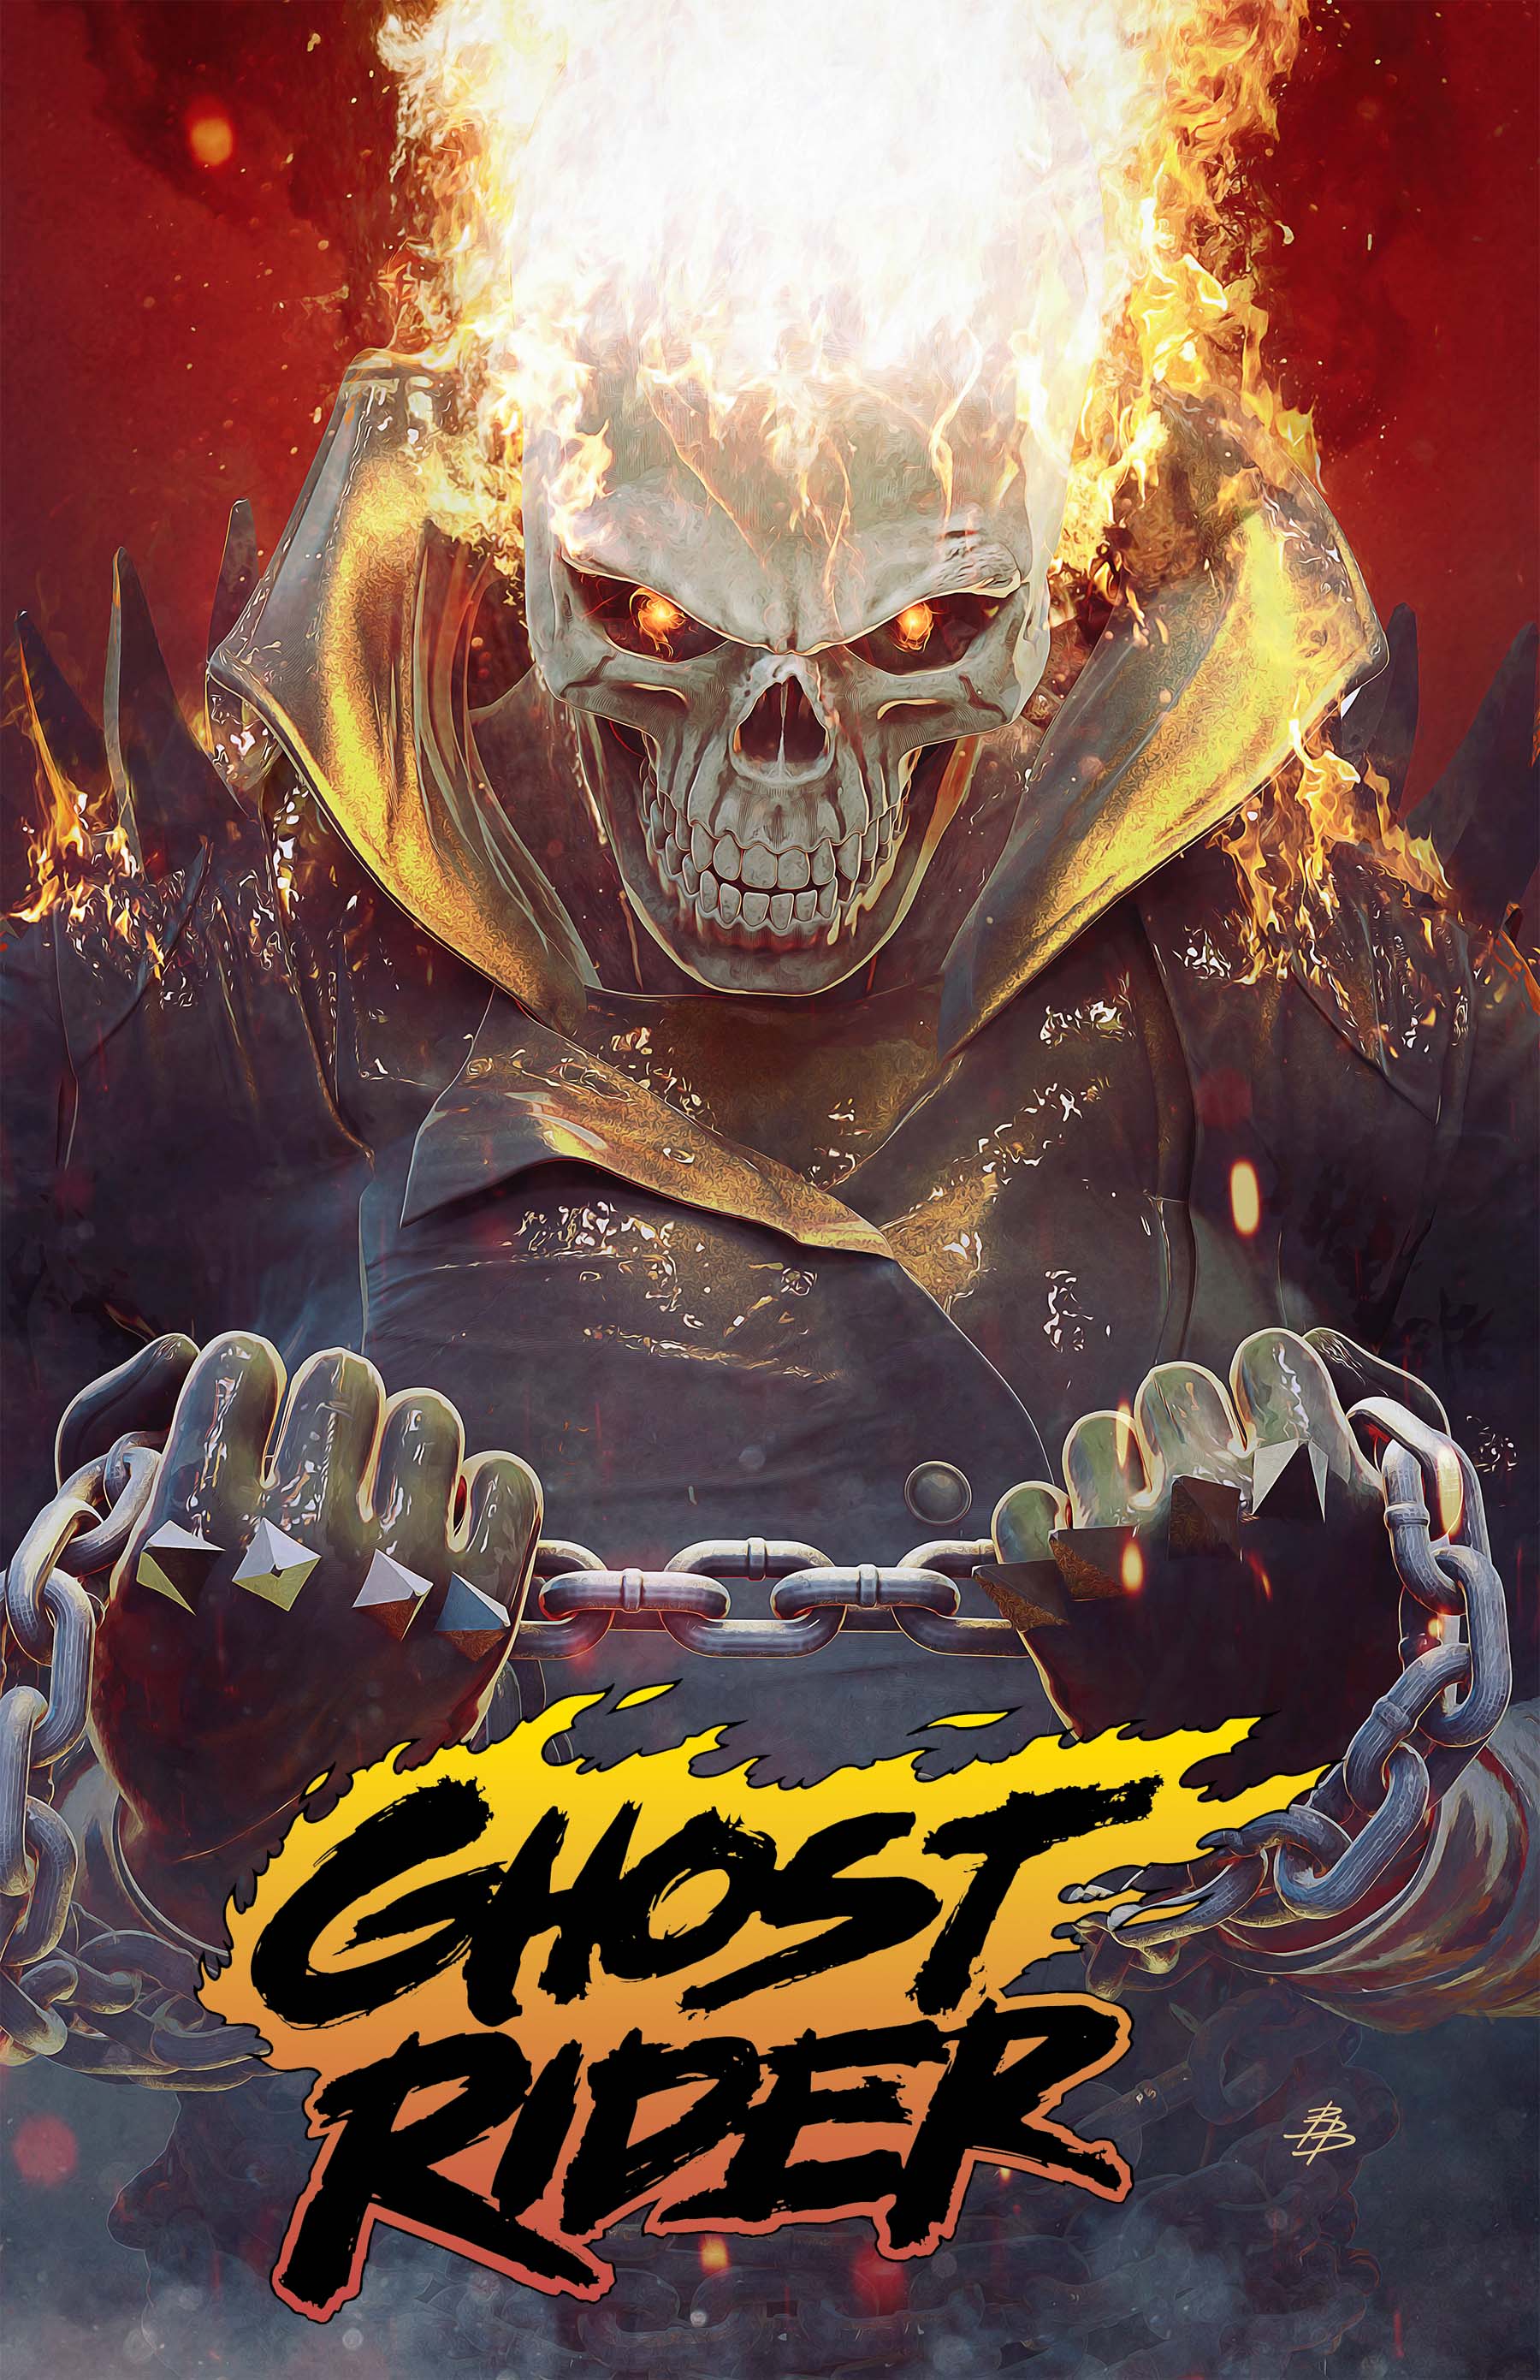 GHOST RIDER VOL. 3: DRAGGED OUT OF HELL TPB (Trade Paperback)